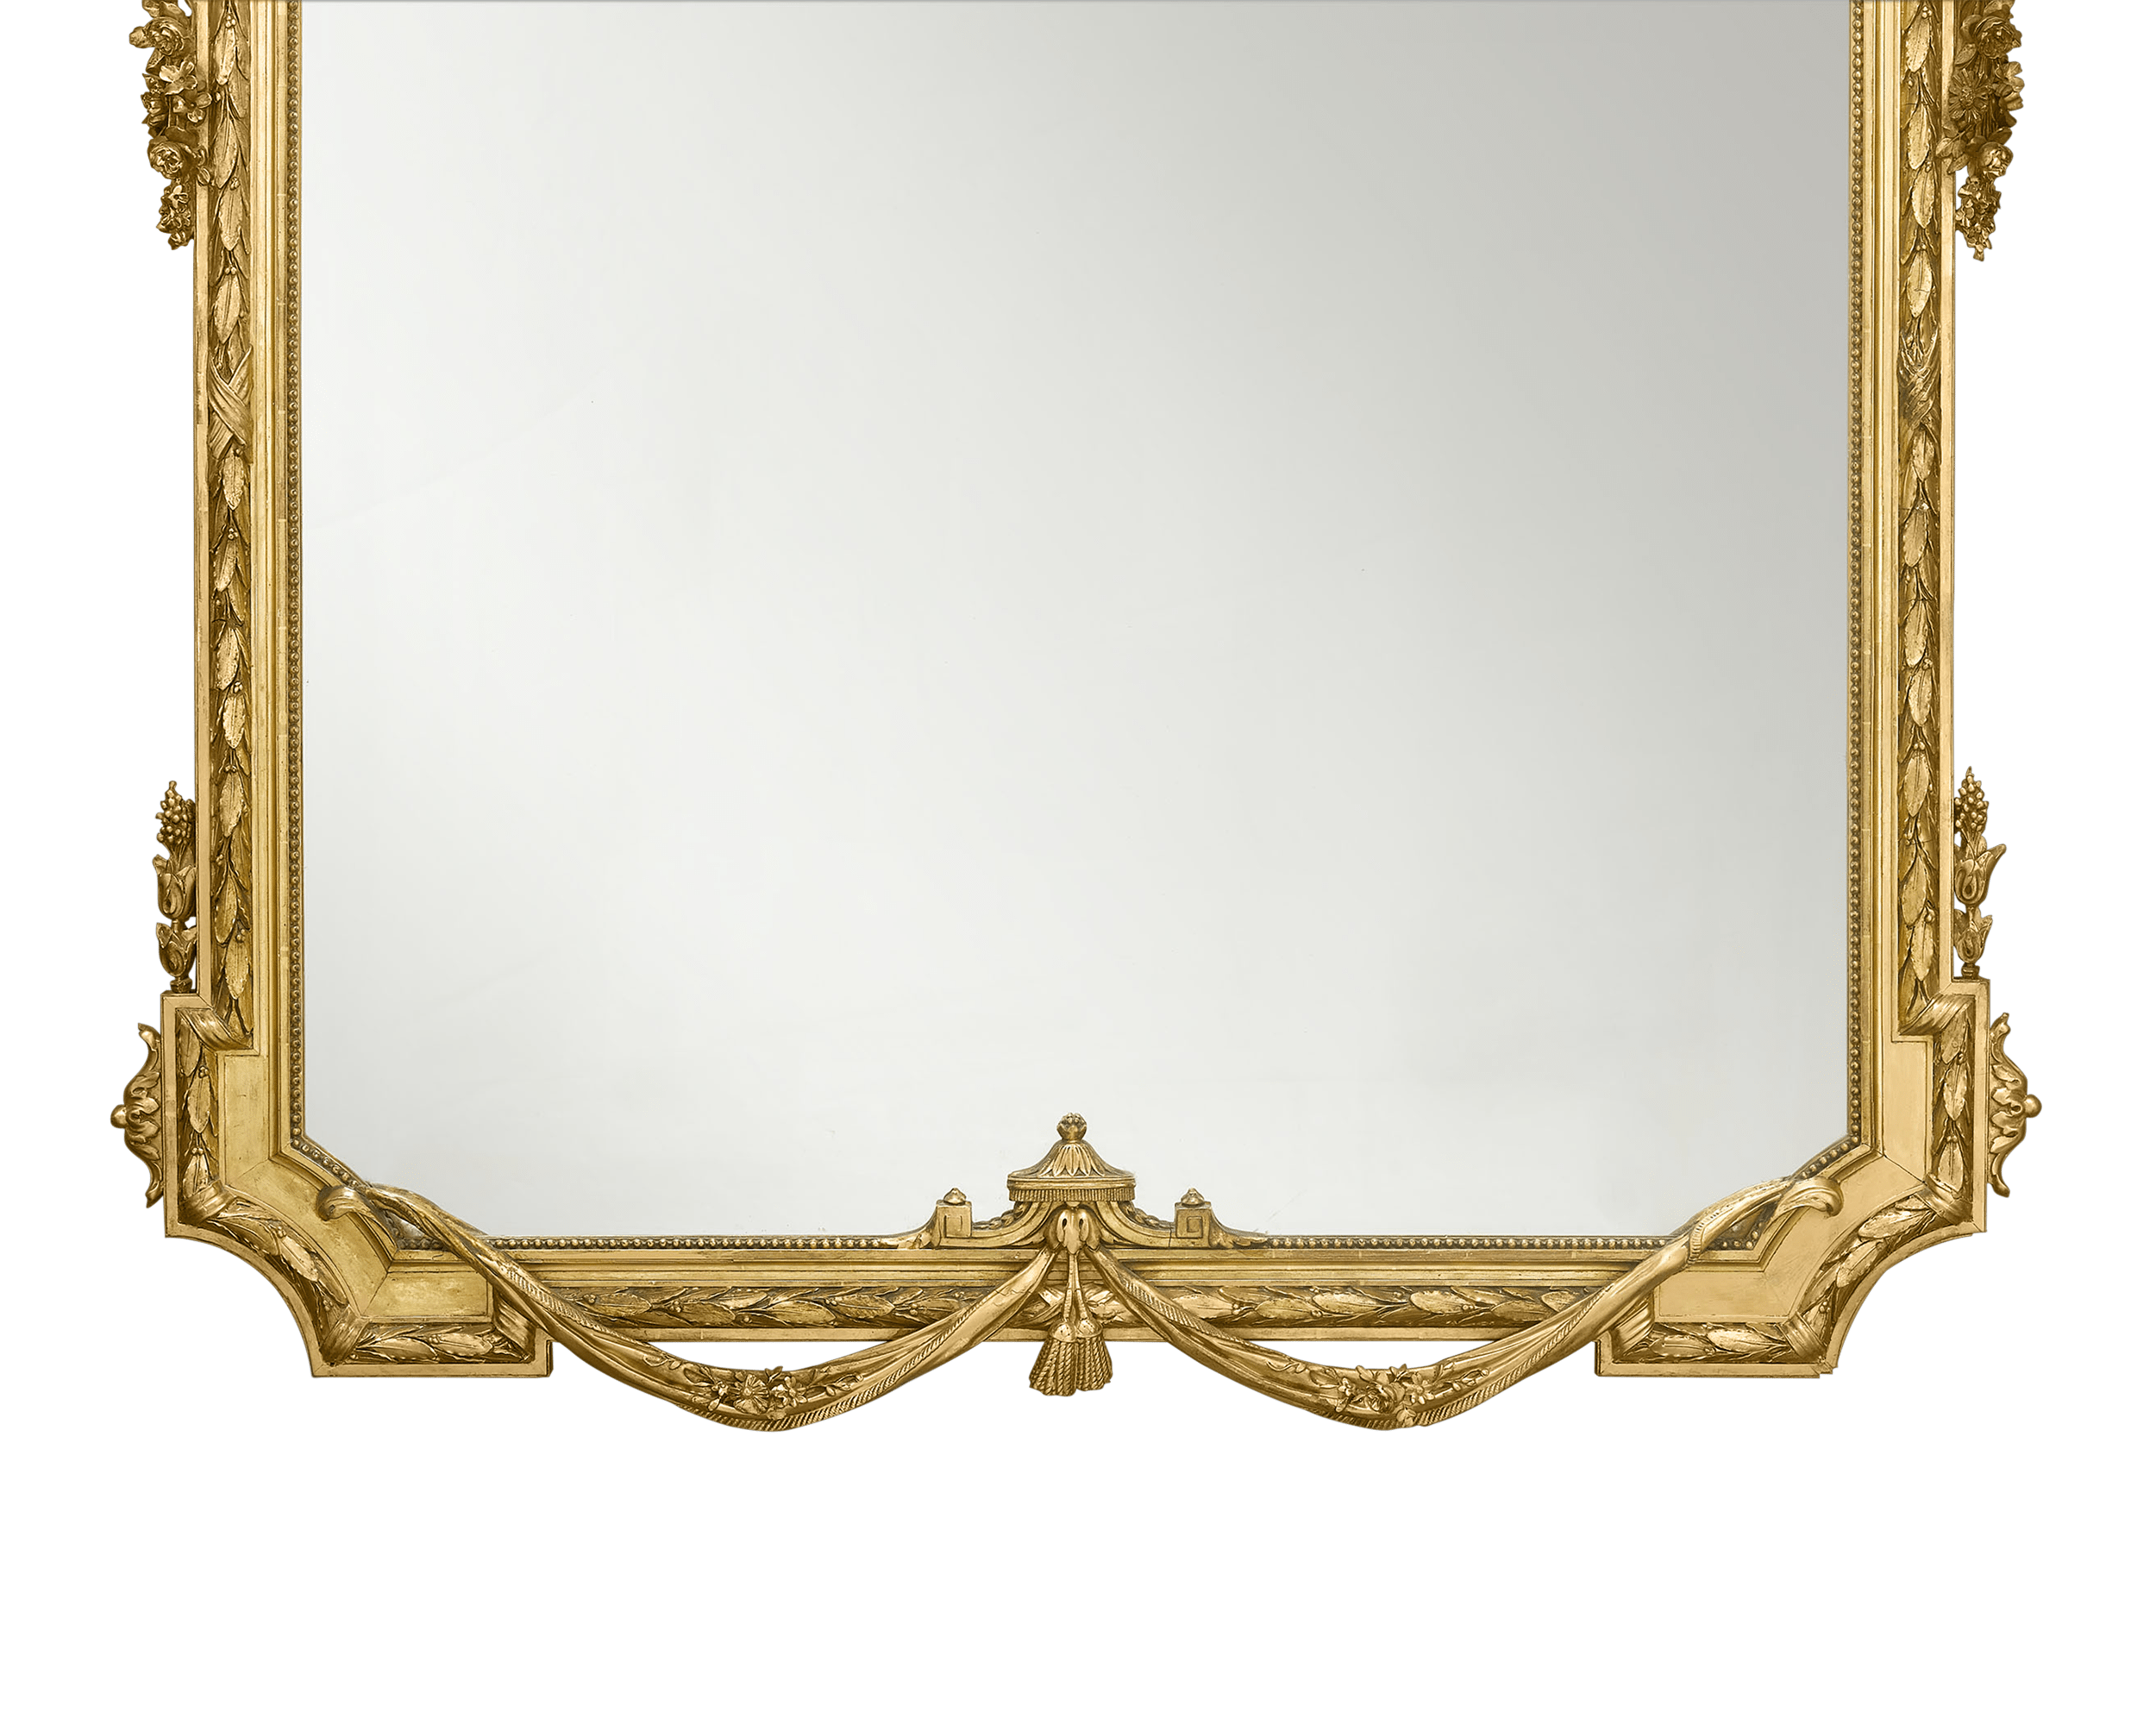 Period mirrors of this size and condition are extremely rare